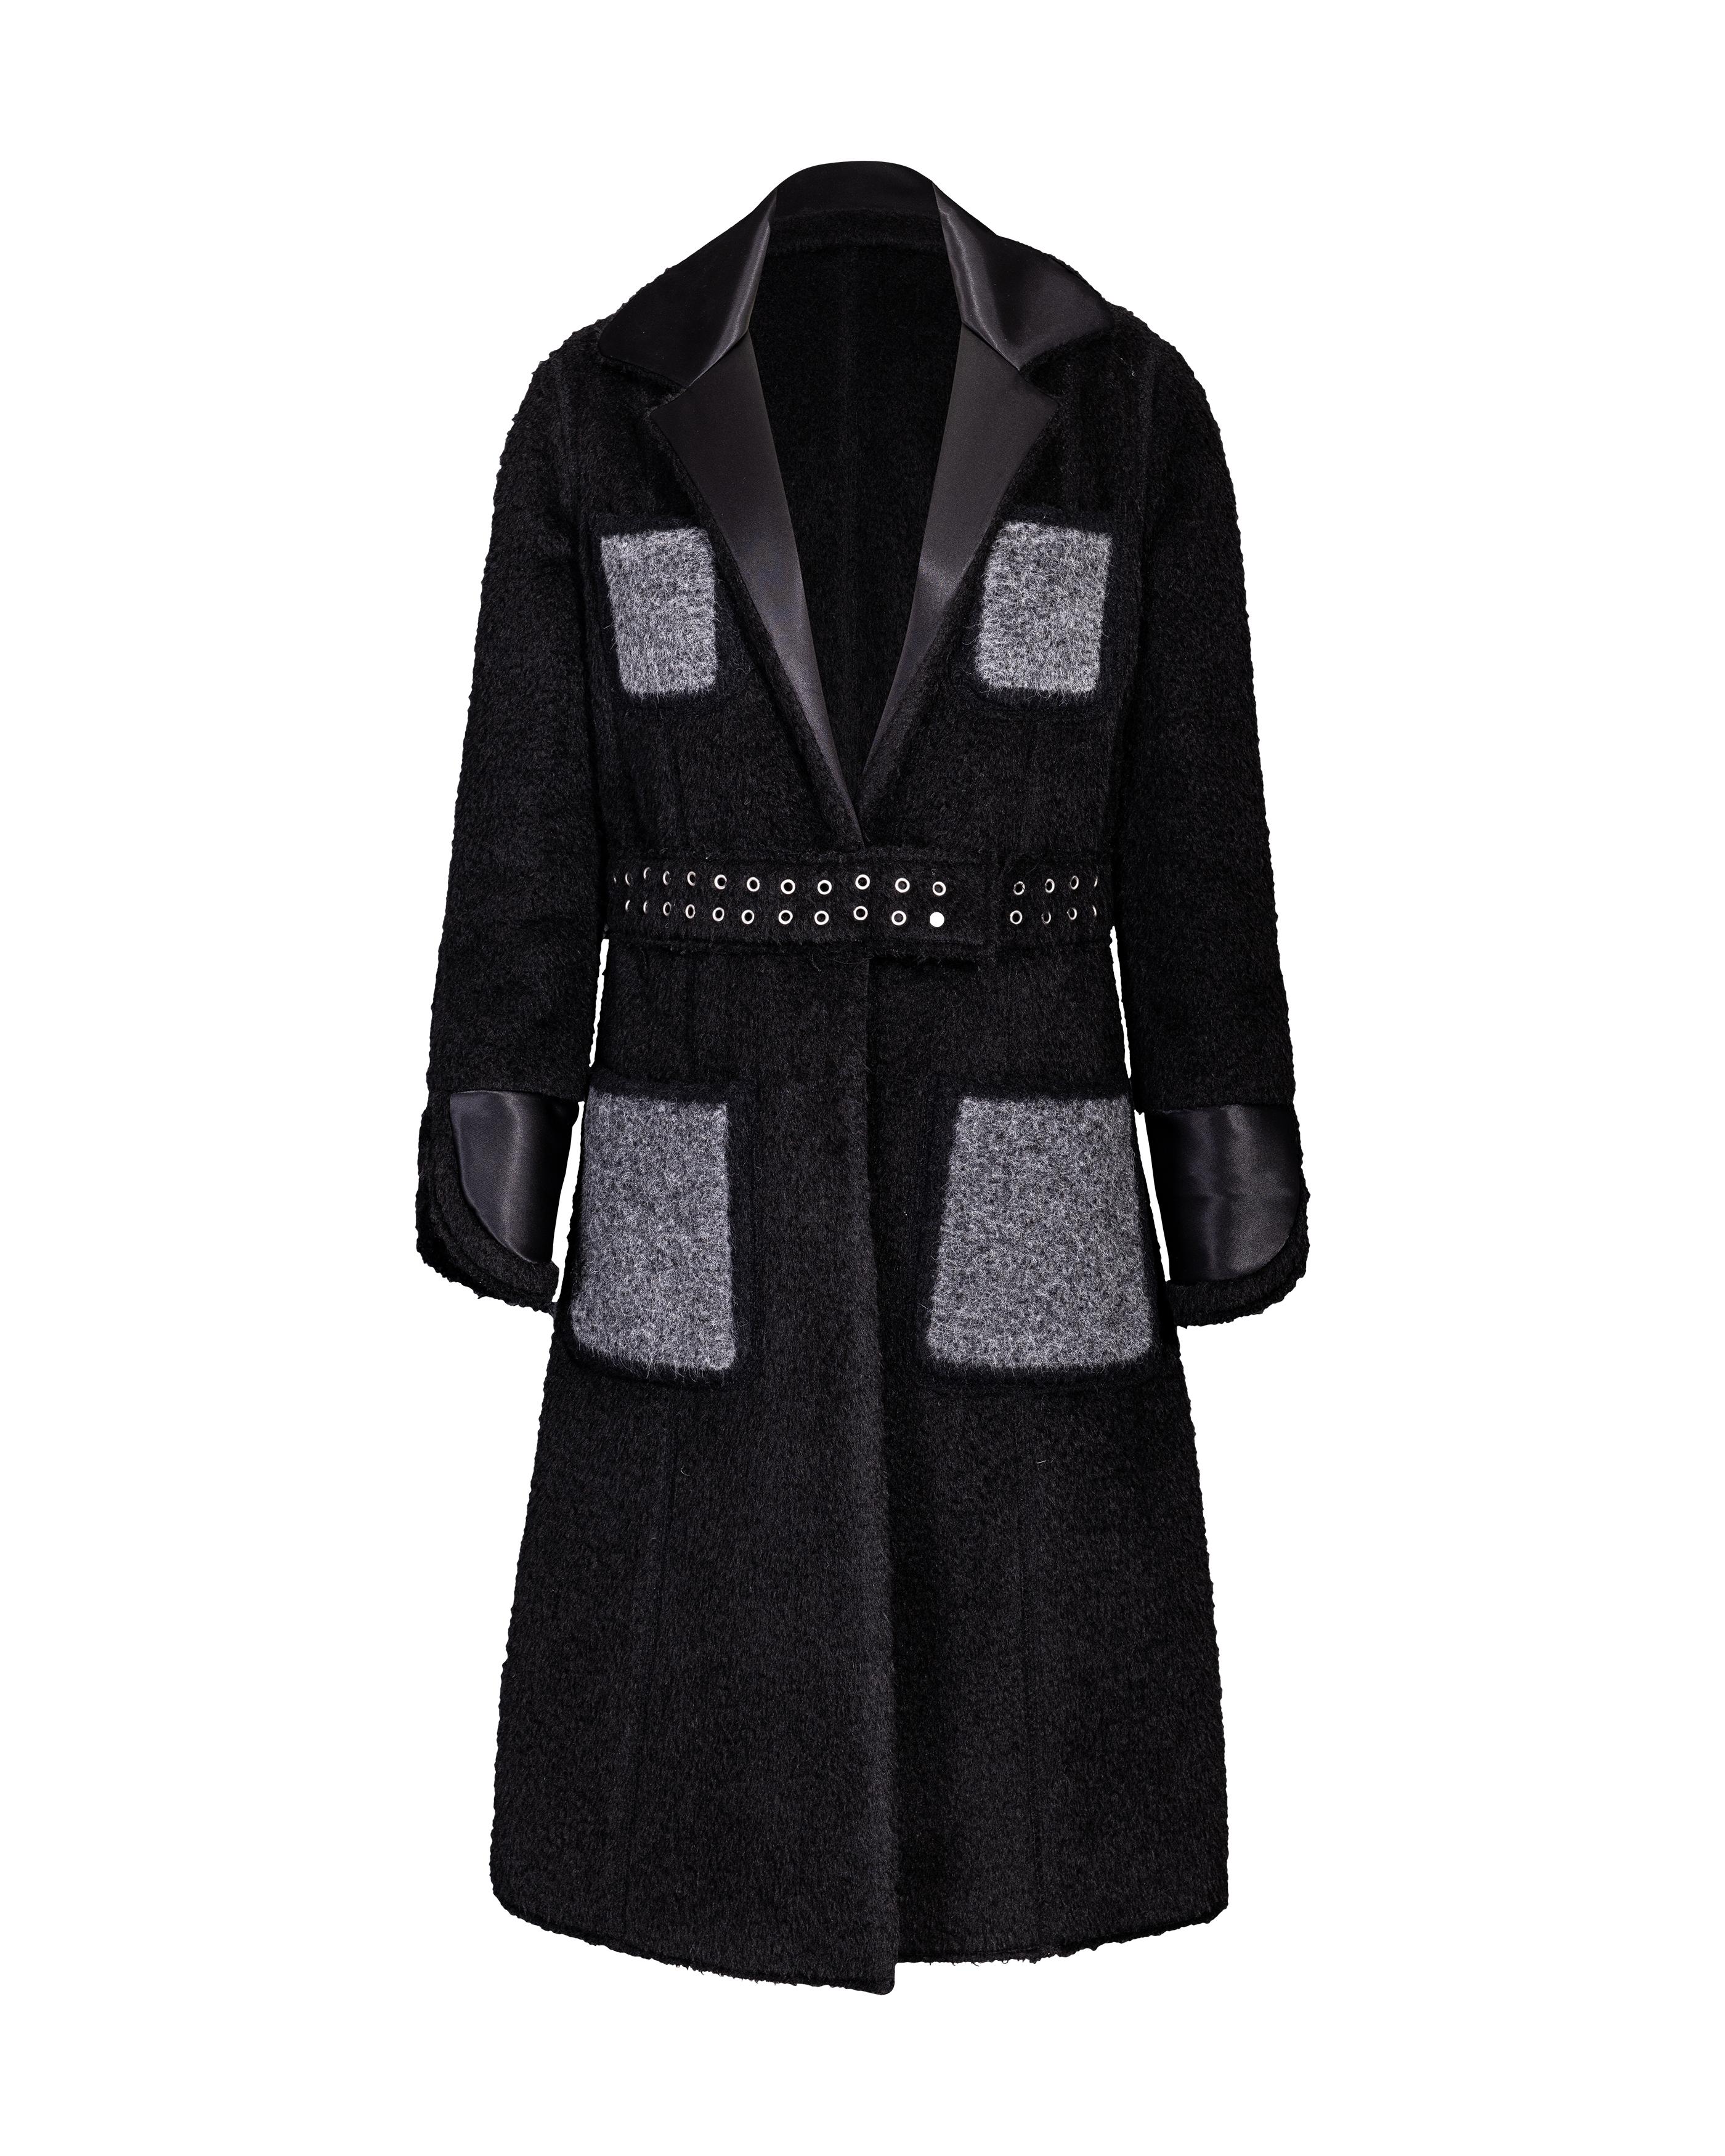 Pre-Fall 2014 Céline by Phoebe Philo Black Shearling Coat with Gray Accents For Sale 5